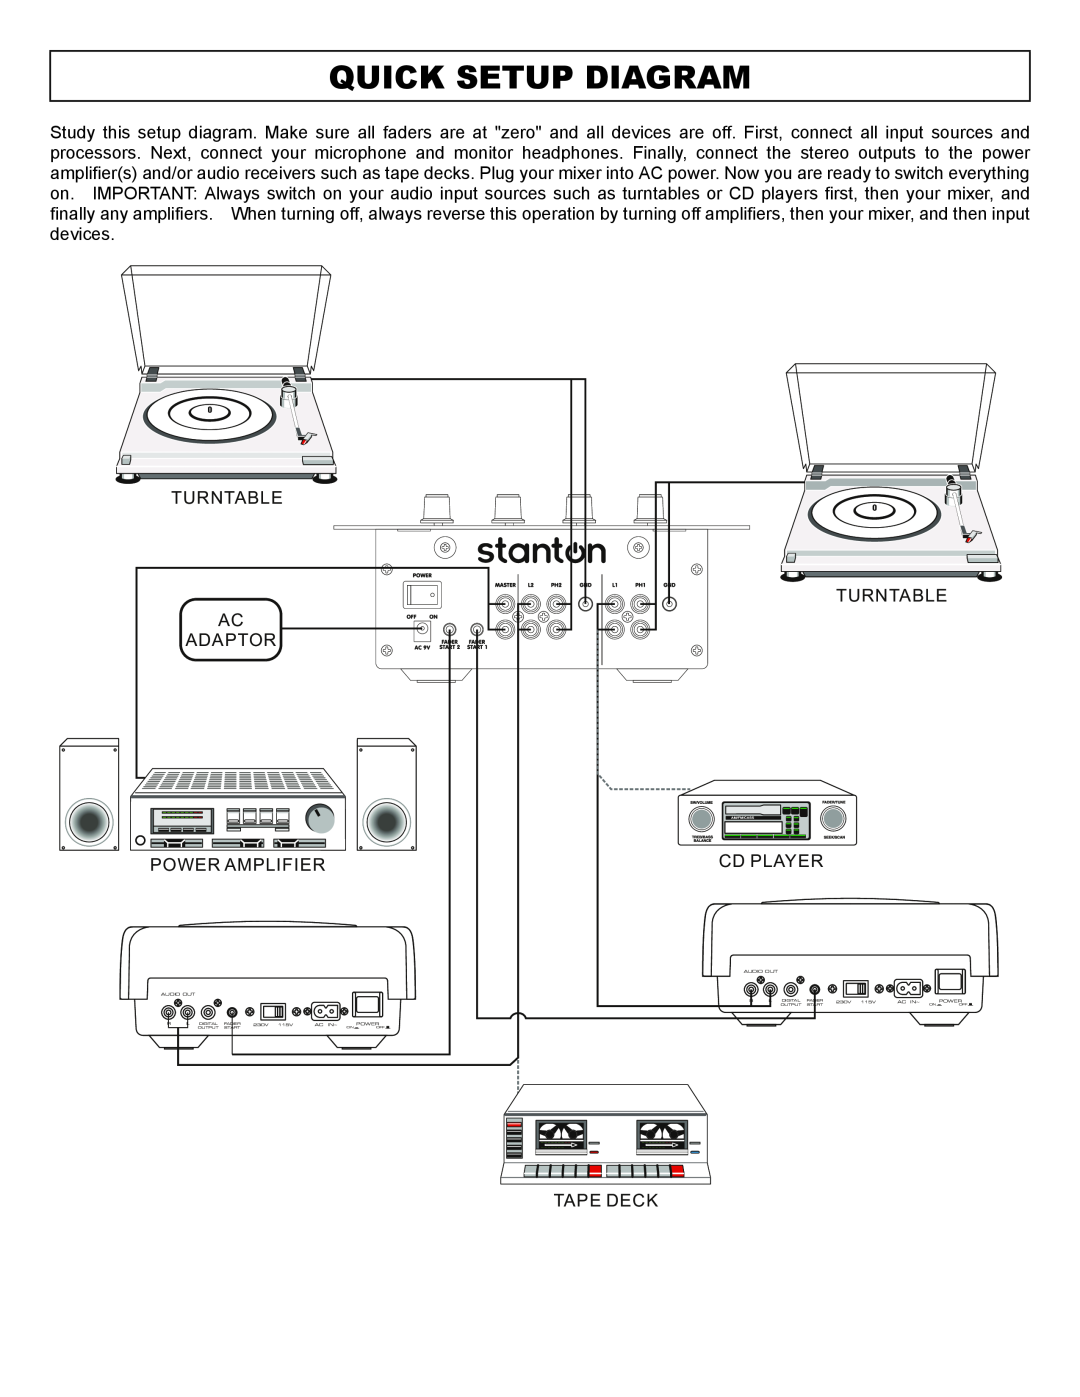 Stanton SINGLE TOP LOADING CD PLAYER PROFESSIONAL PREAMP MIXER Quick Setup Diagram, Turntable, Adaptor, Power Amplifier 